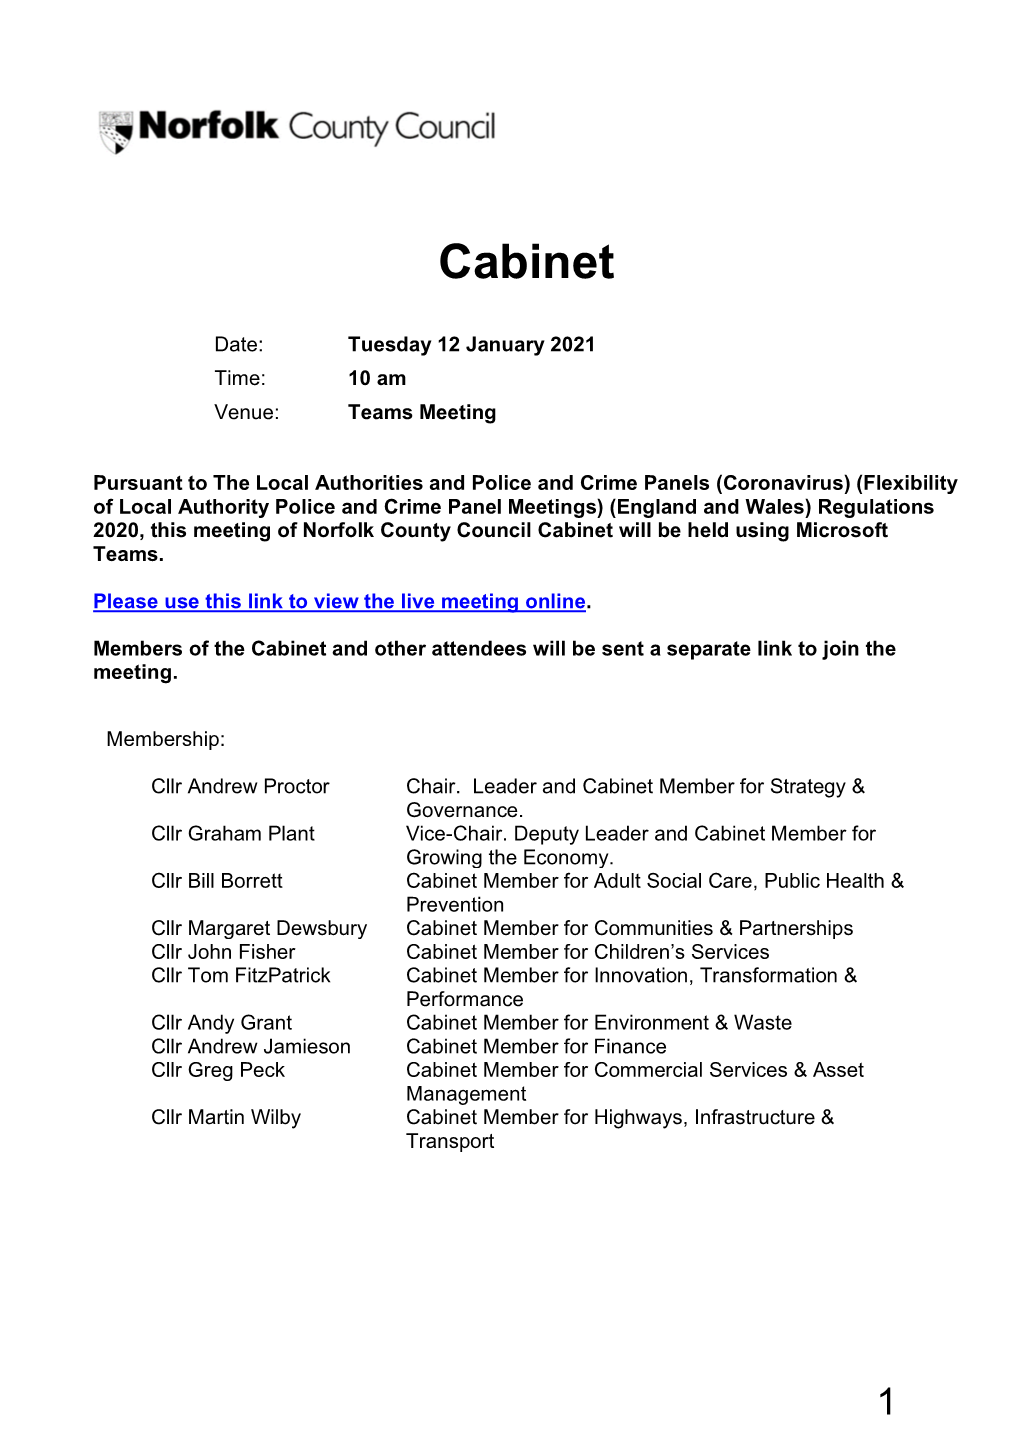 Risk Management Report to Cabinet on 12 January 2021